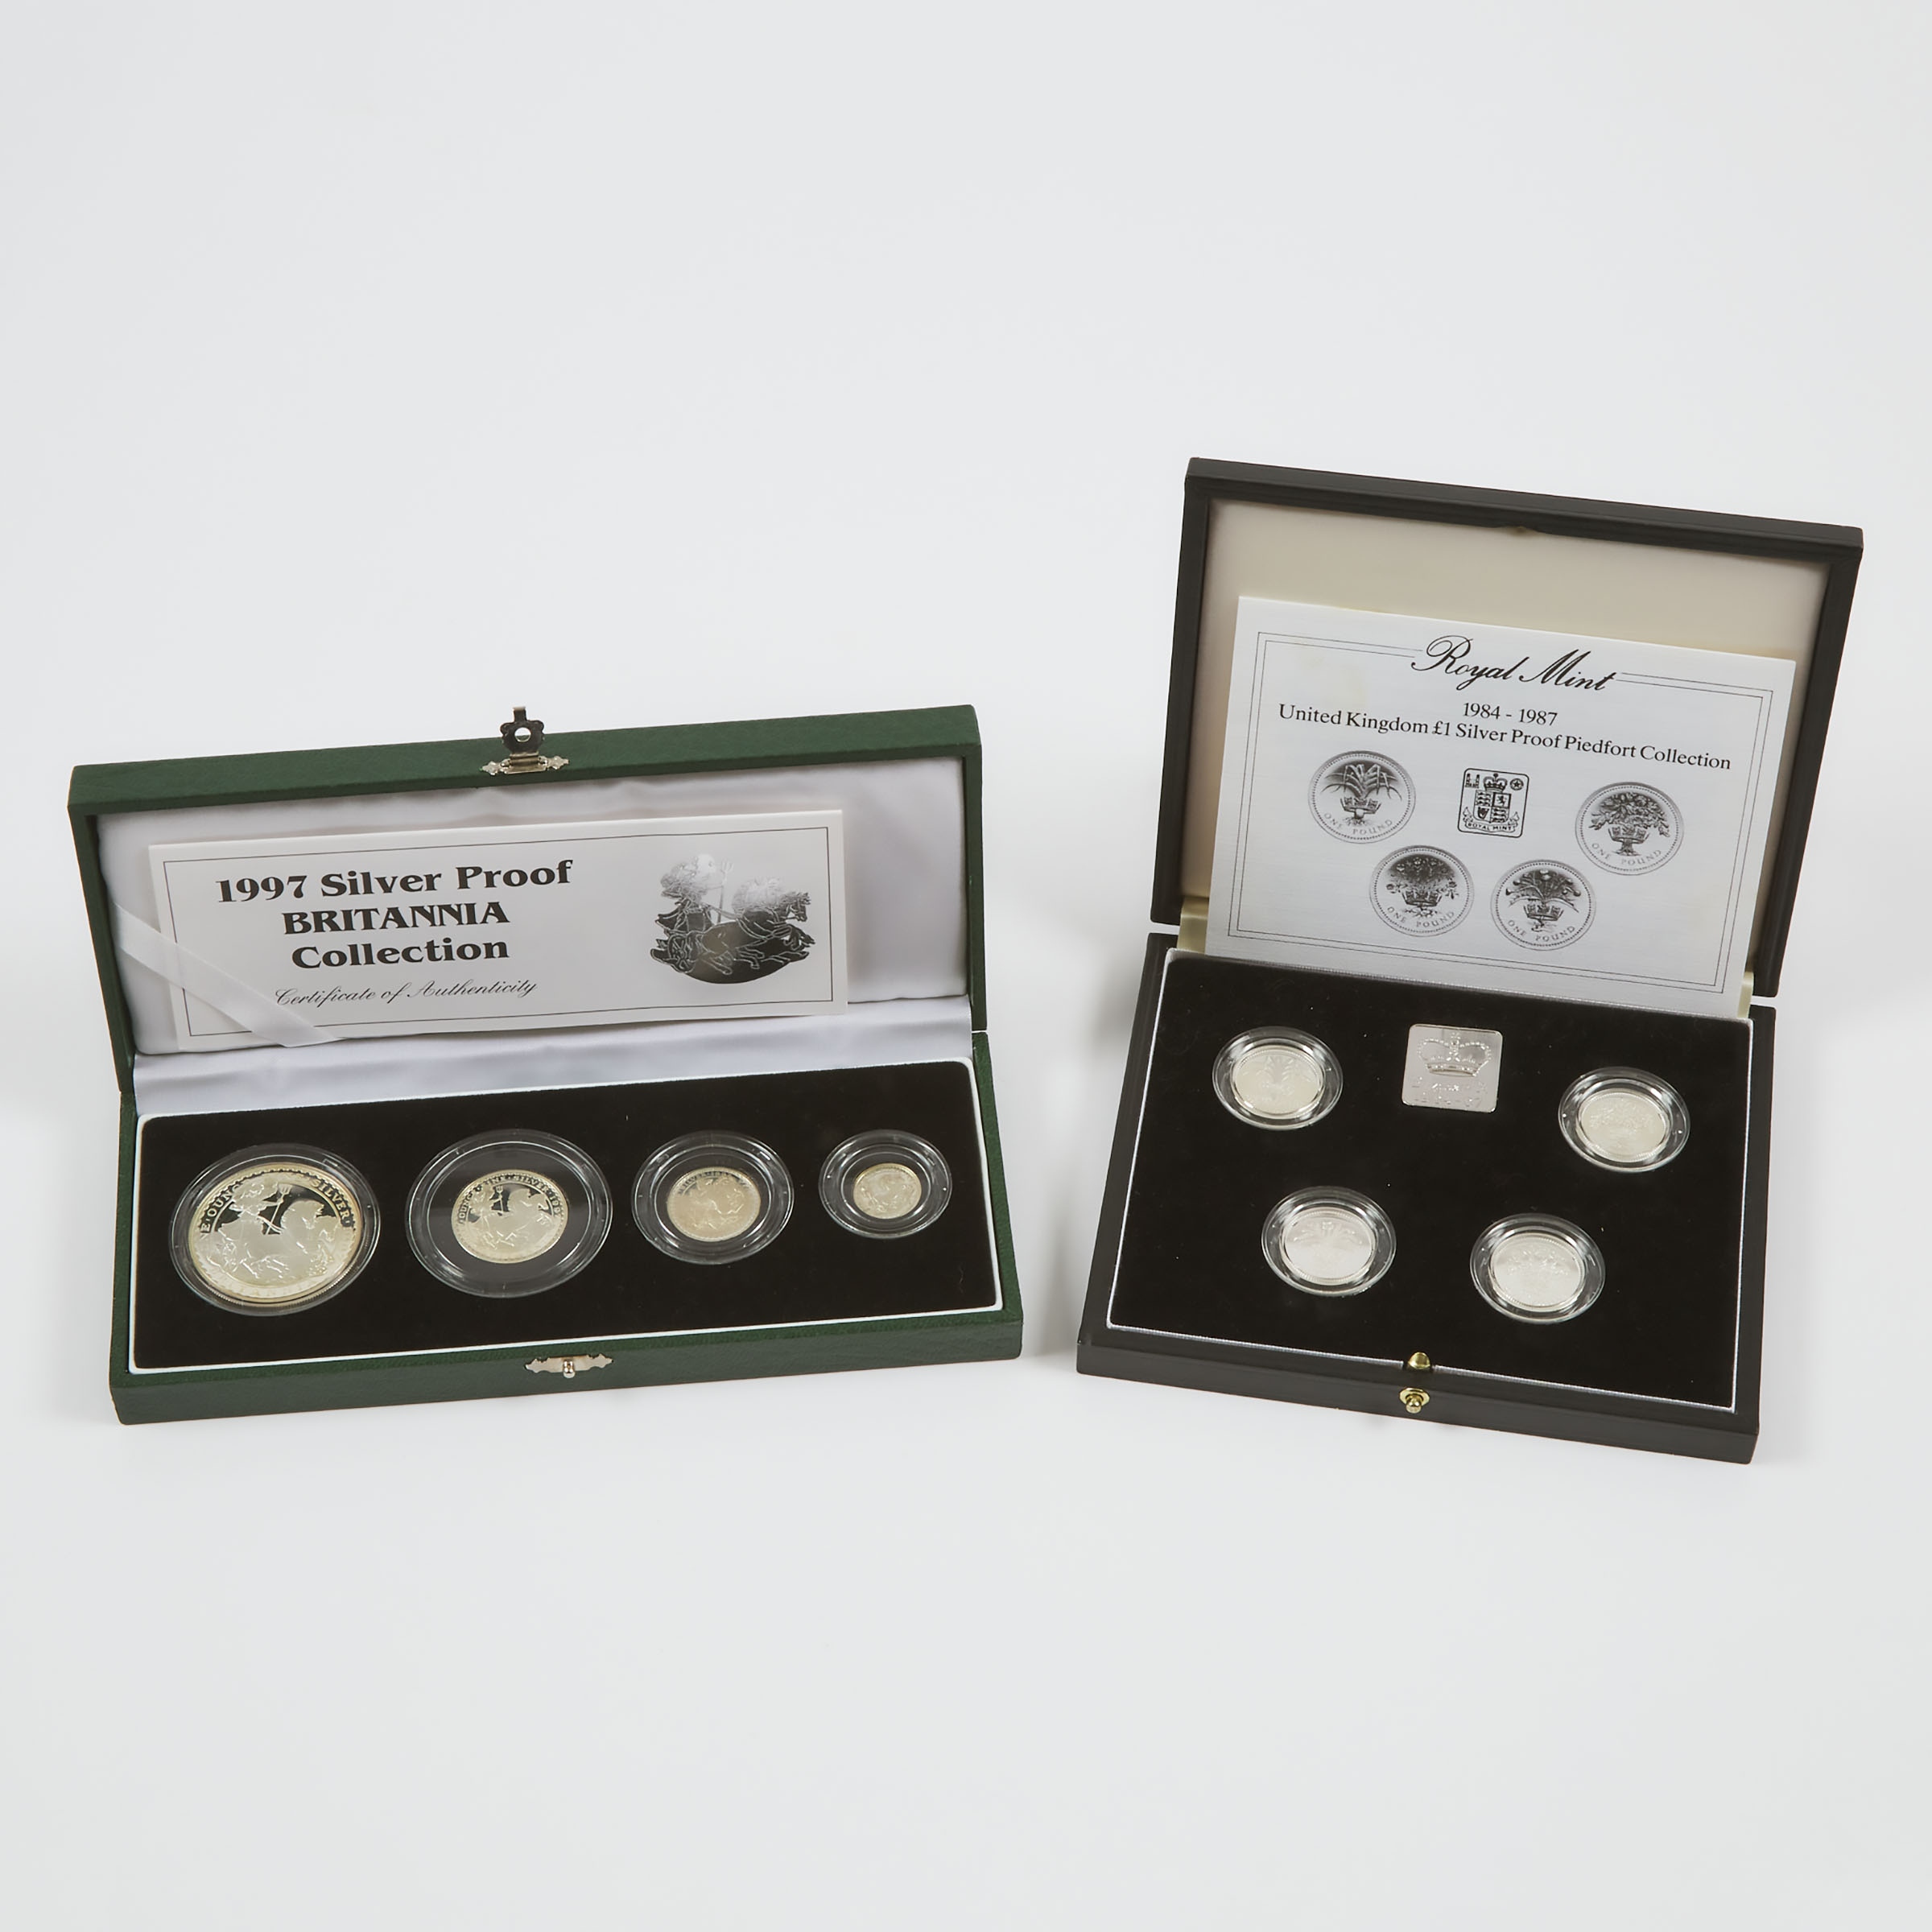 2 x British Four Sterling Silver Coin Proof Sets